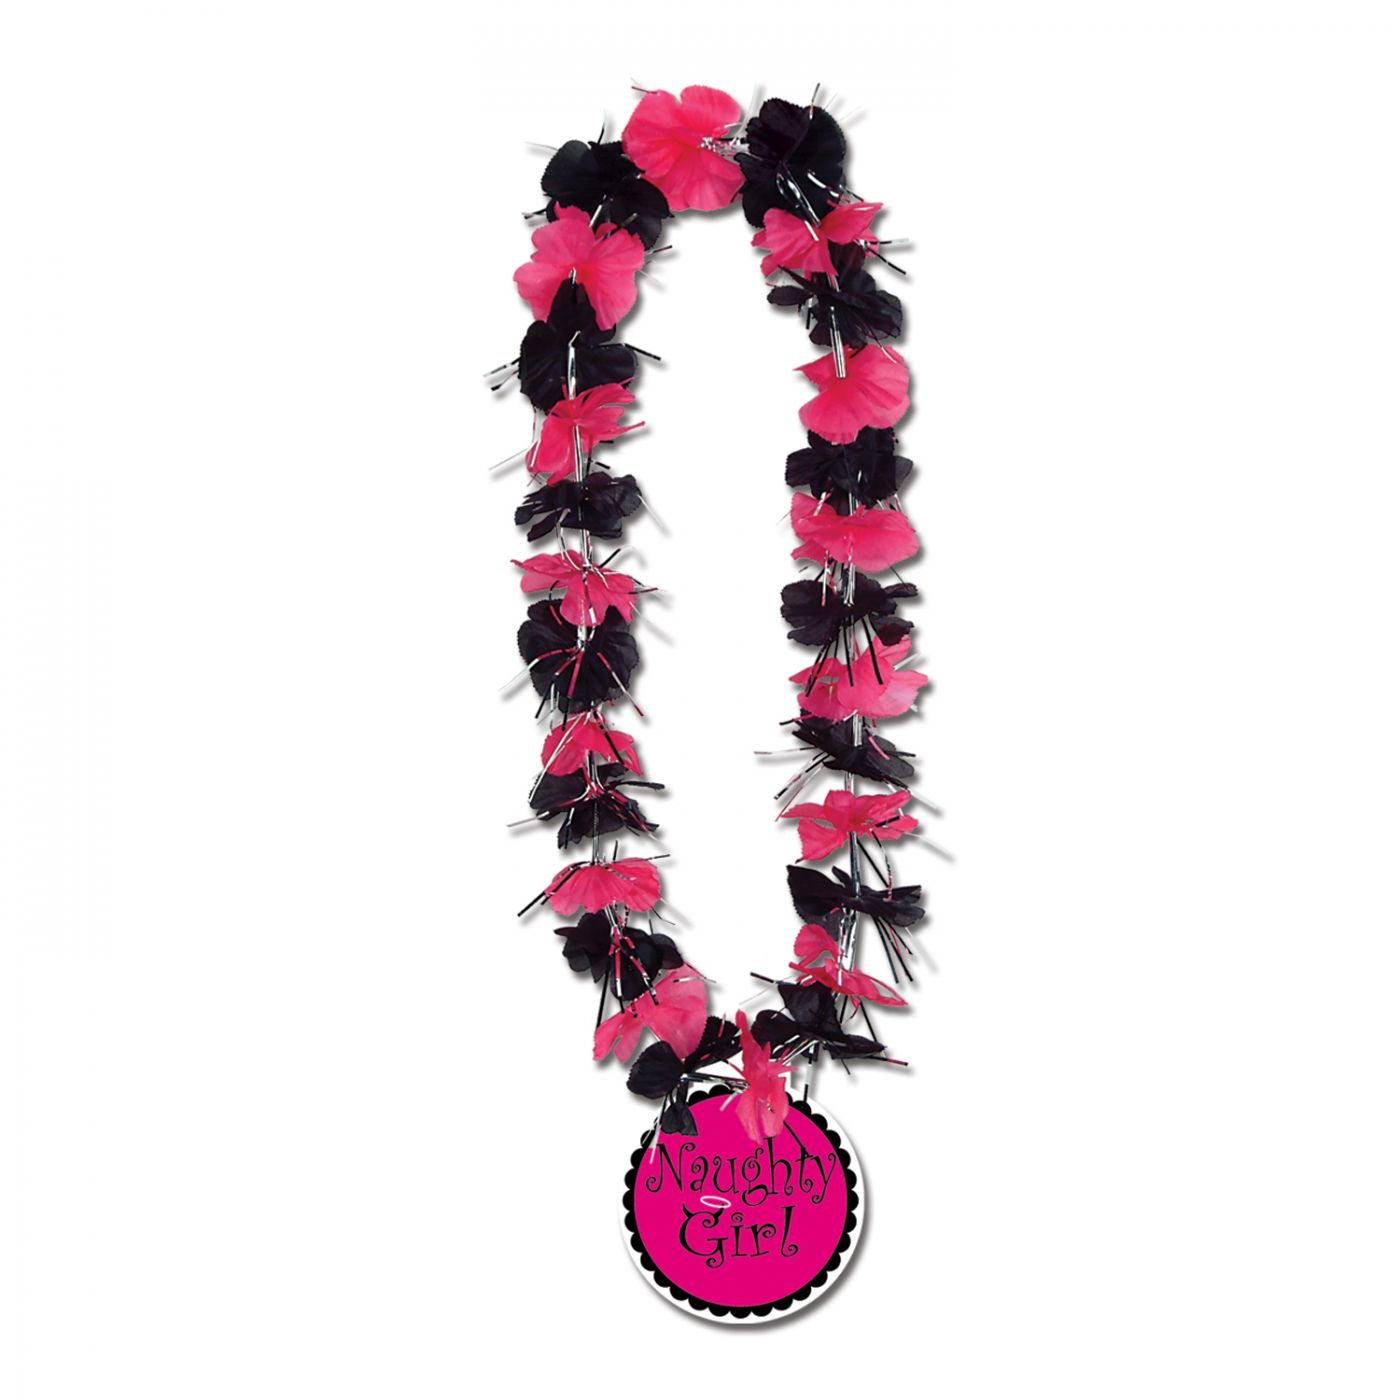 Party Lei w/Naughty Girl Medallion image